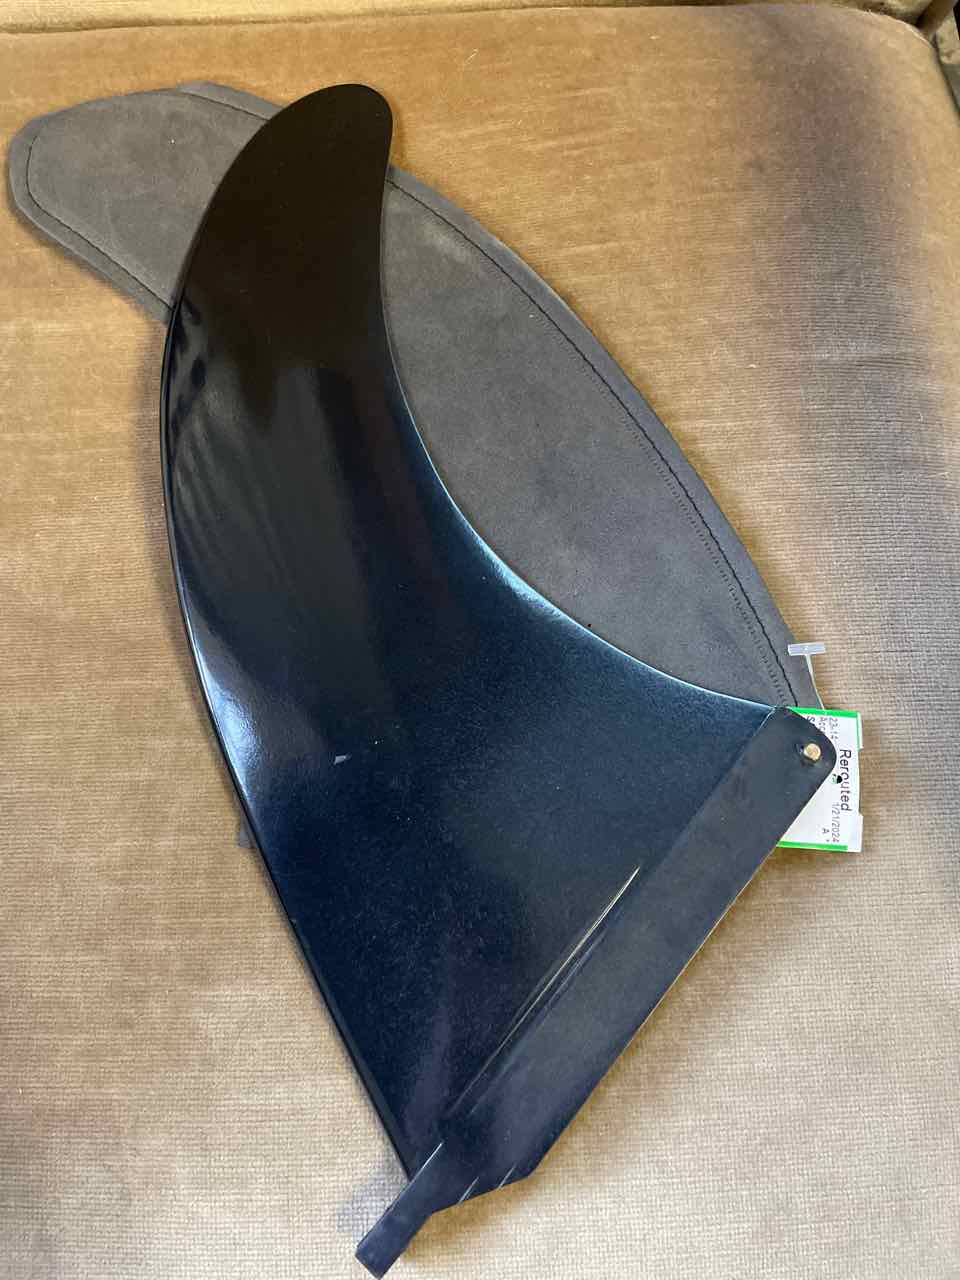 SBS Classic Surf and SUP Fin